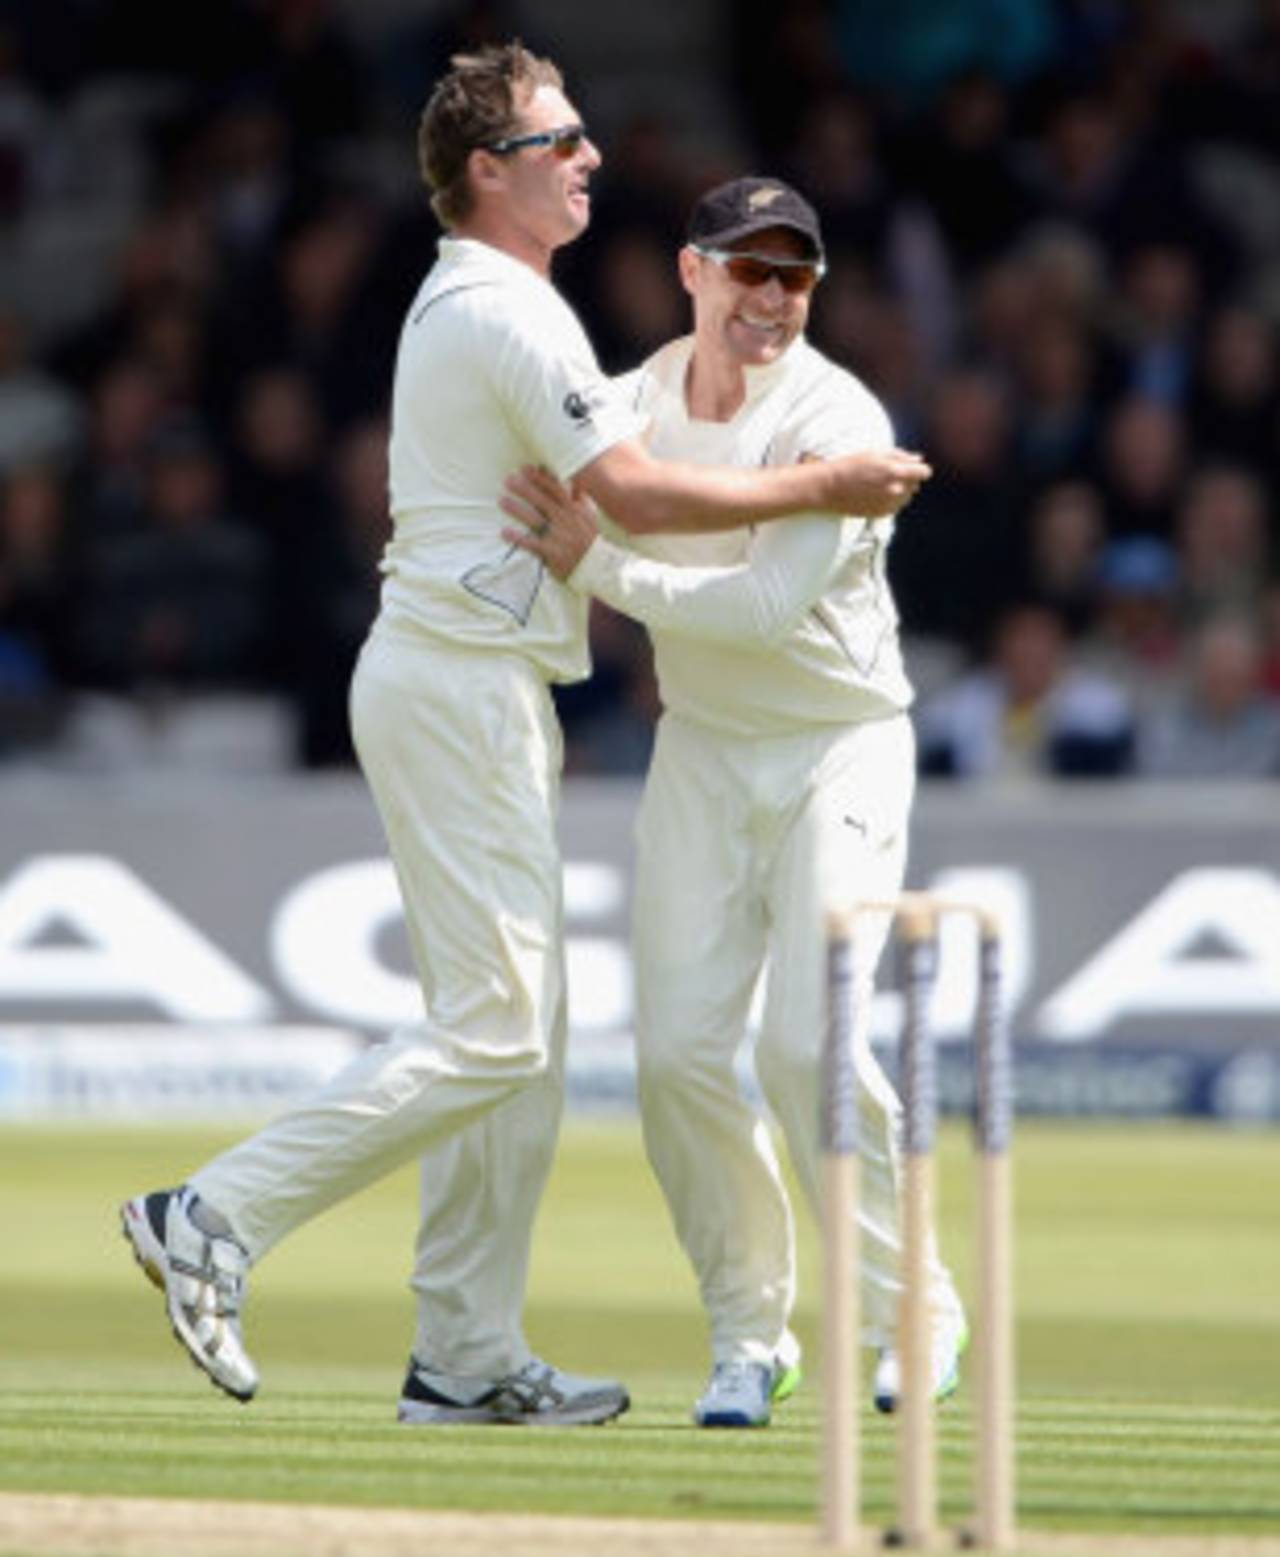 Bruce Martin celebrates his wicket with Brendon McCullum, England v New Zealand, 1st Investec Test, Lord's, 1st day, May 16, 2013